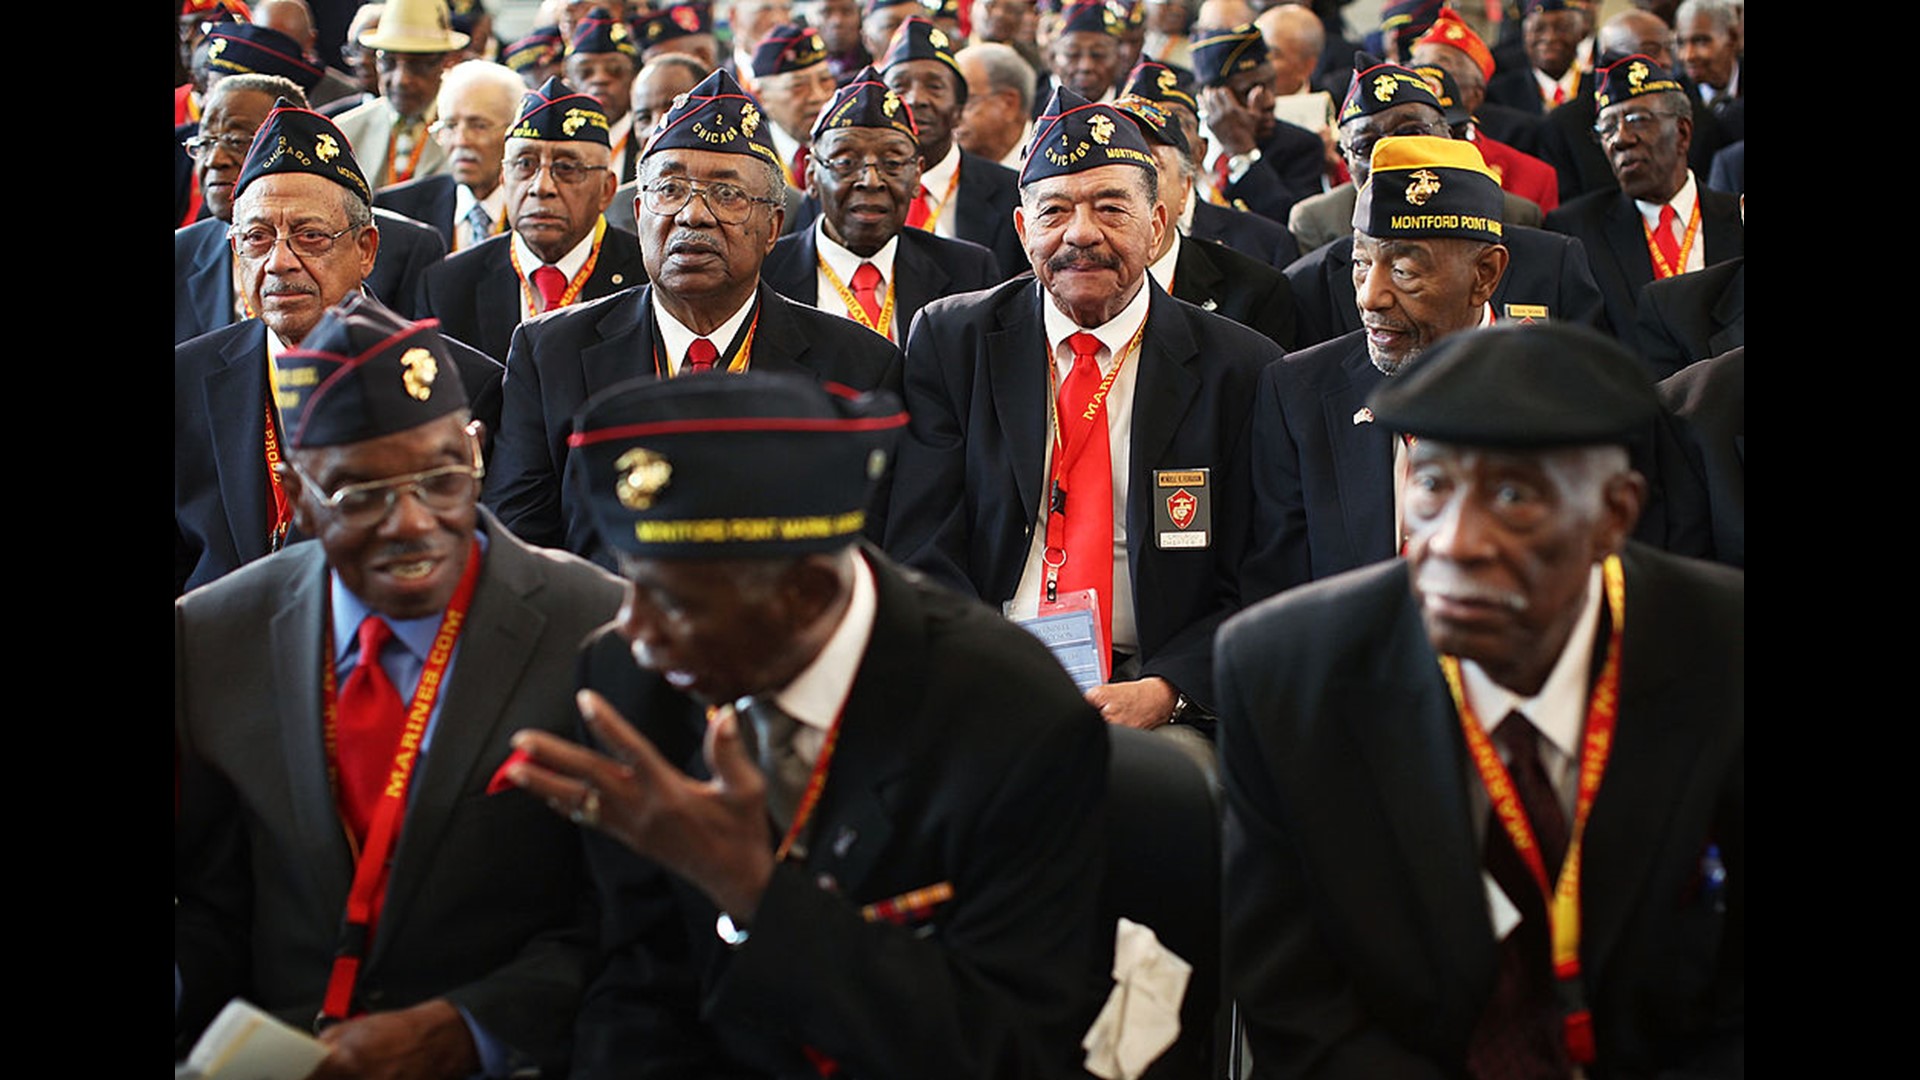 The Montford Point Marines faced racism and segregated basic training to serve their country during World War II.